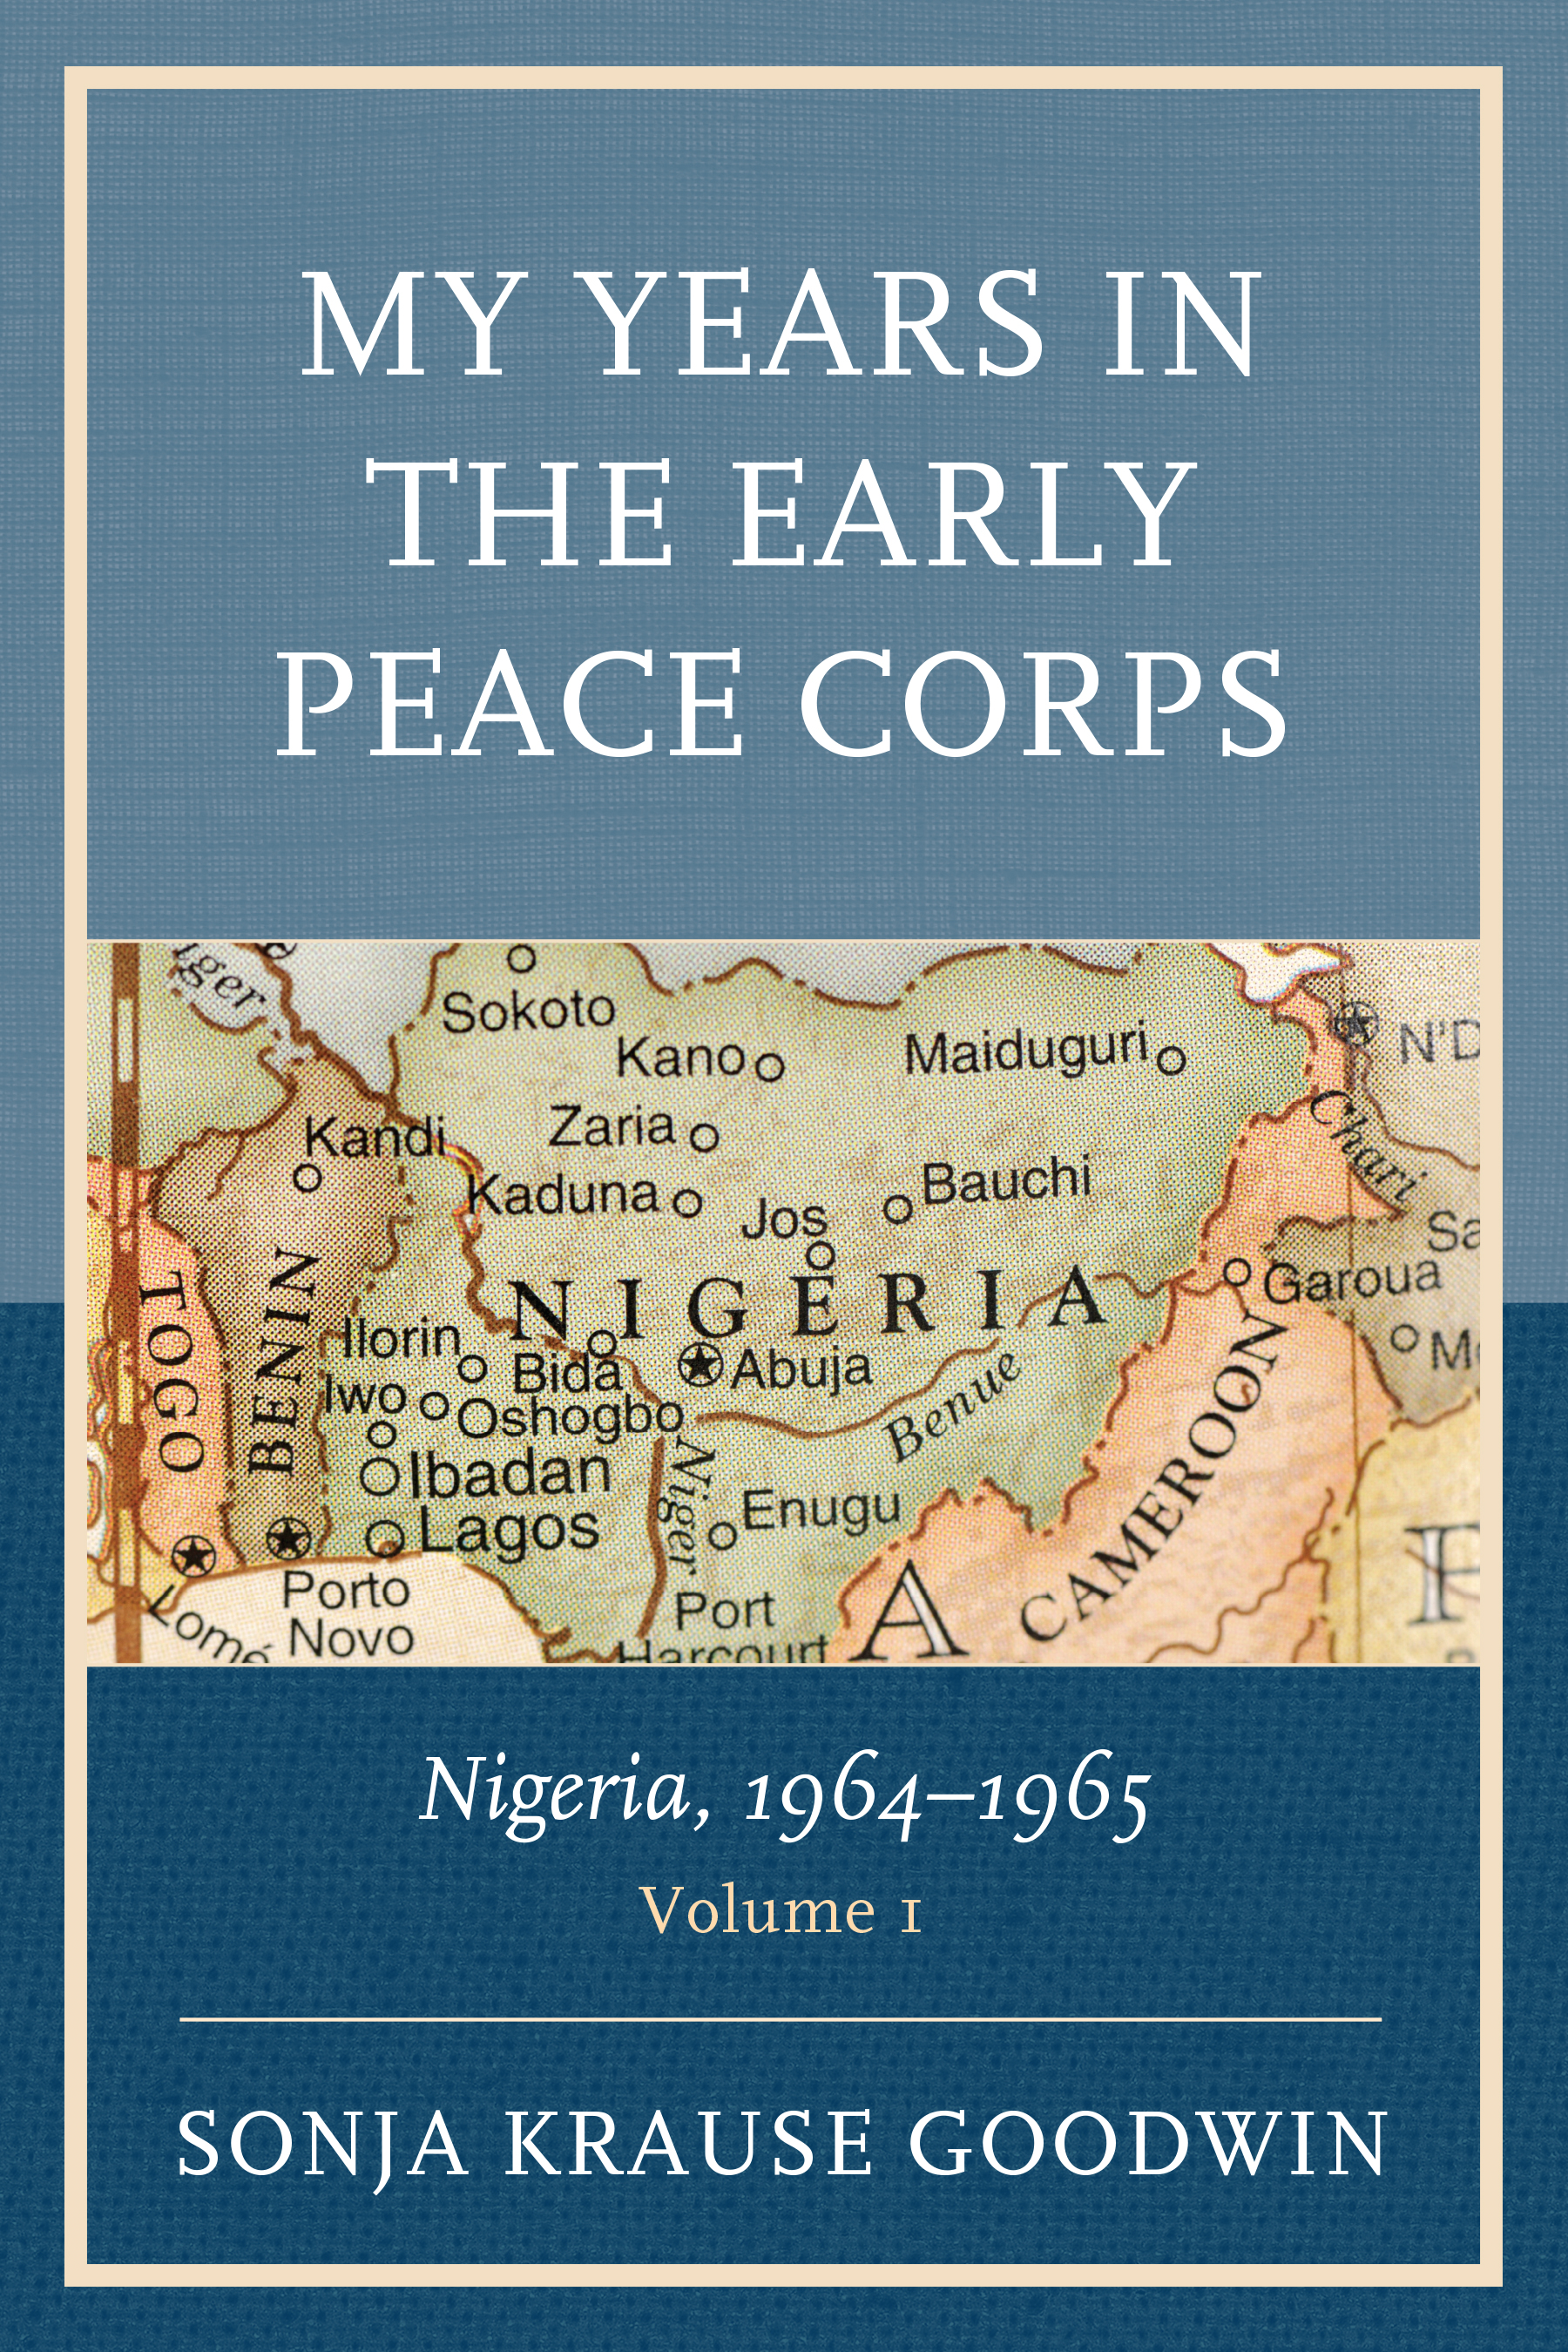 My Years in the Early Peace Corps: Nigeria, 1964-1965